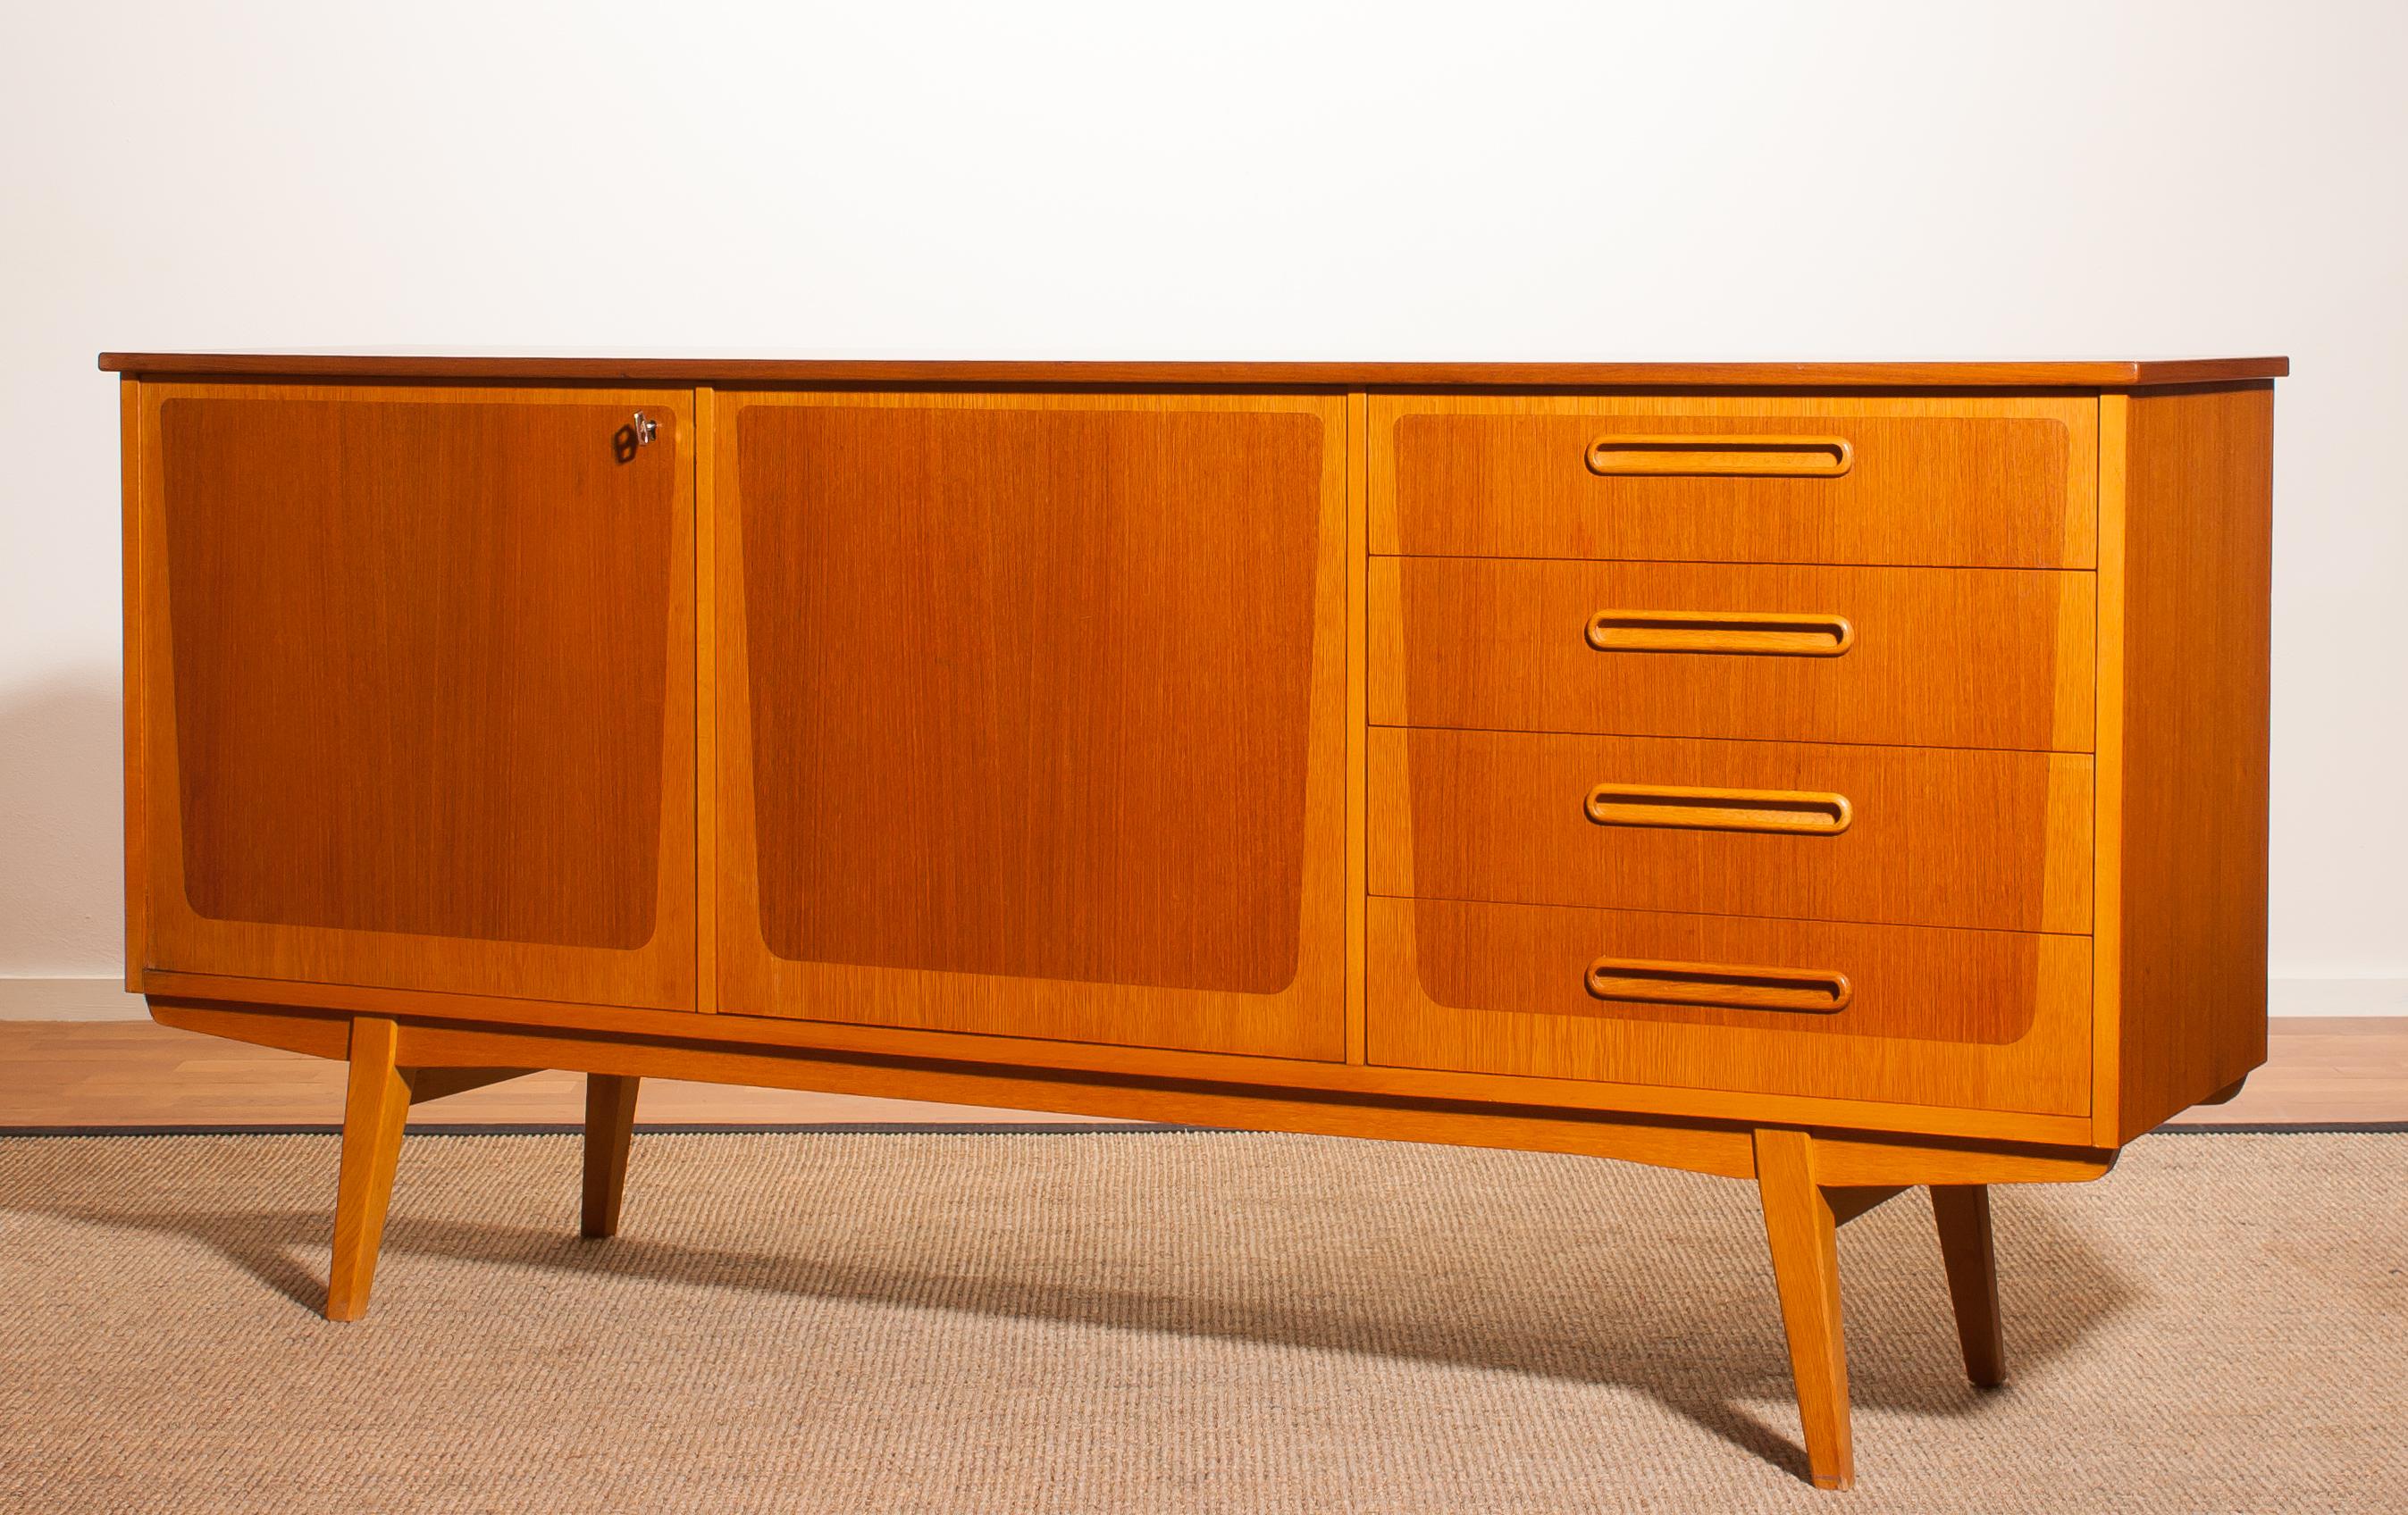 Beautiful sideboard from Sweden.
This cabinet is made of teak and oak.
It has two doors and four drawers.
It is in very good condition.
Period 1960s.
Dimensions: H 80 cm, W 172 cm, D 43 cm.